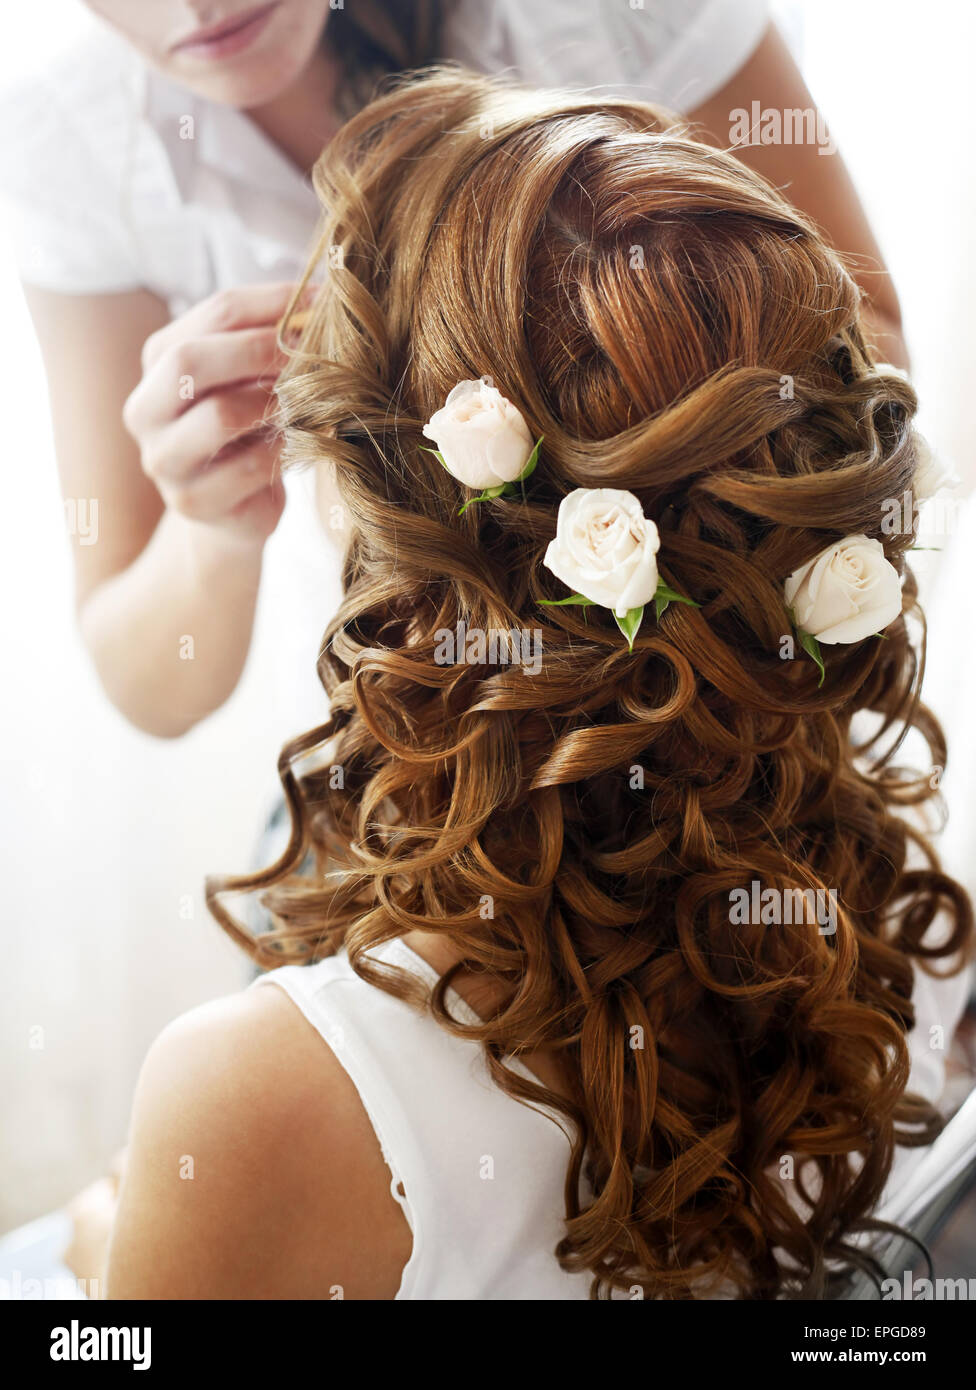 Hairdress of the bride Stock Photo